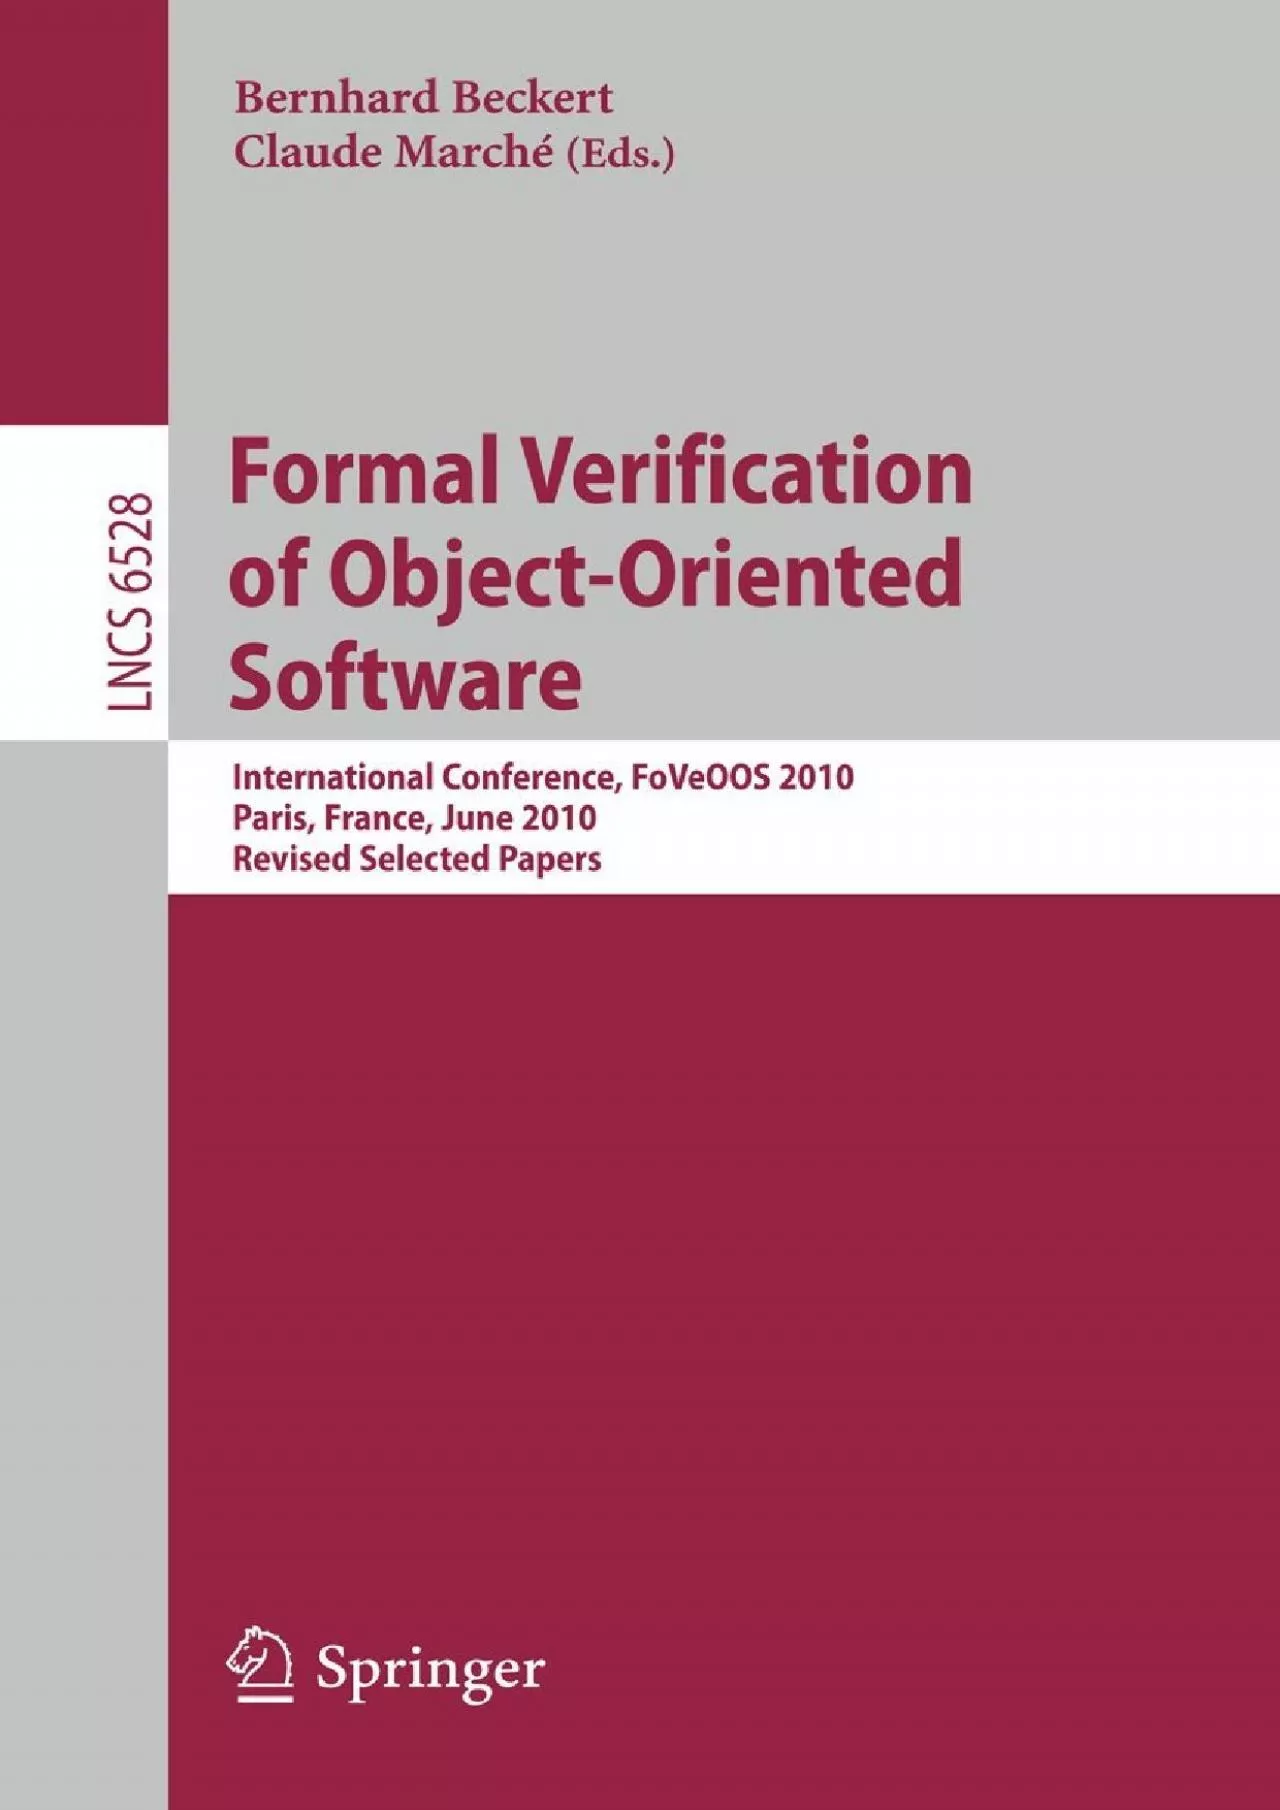 [PDF]-Formal Verification of Object-Oriented Software: International Conference, FoVeOOS